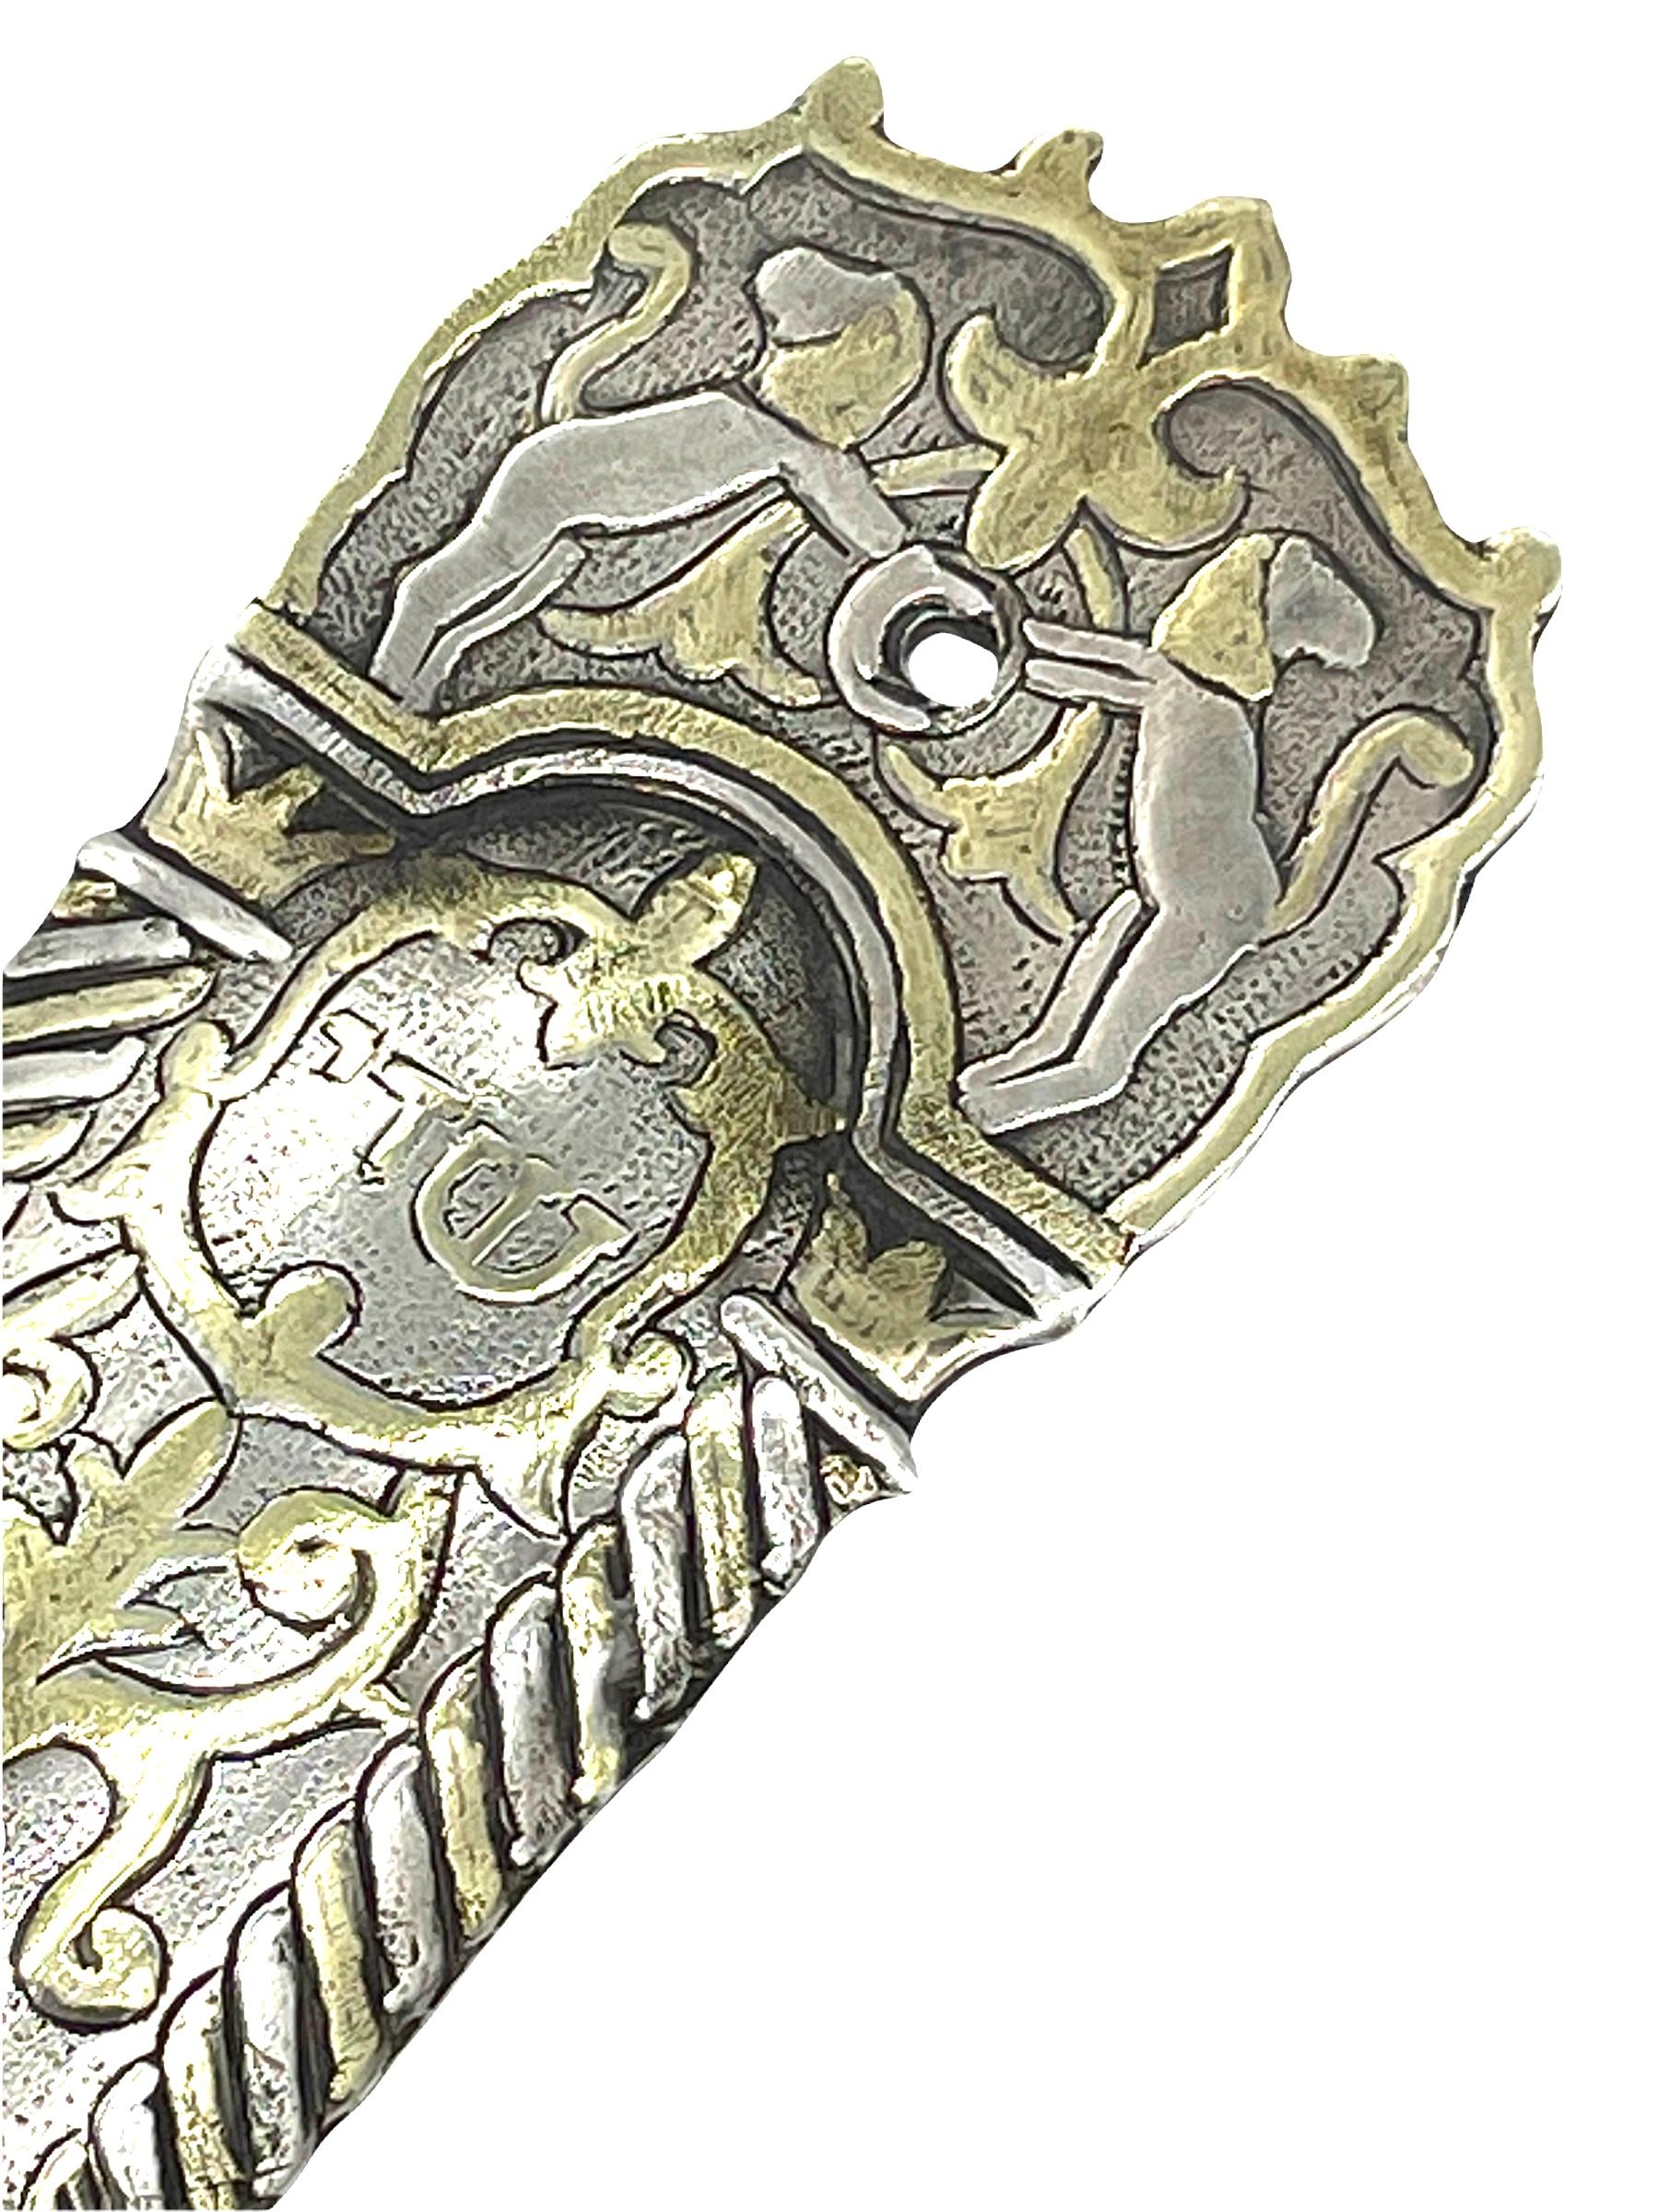 Hand-Crafted Mid-20th Century Syrian Silver and Gold Mezuzah Case For Sale